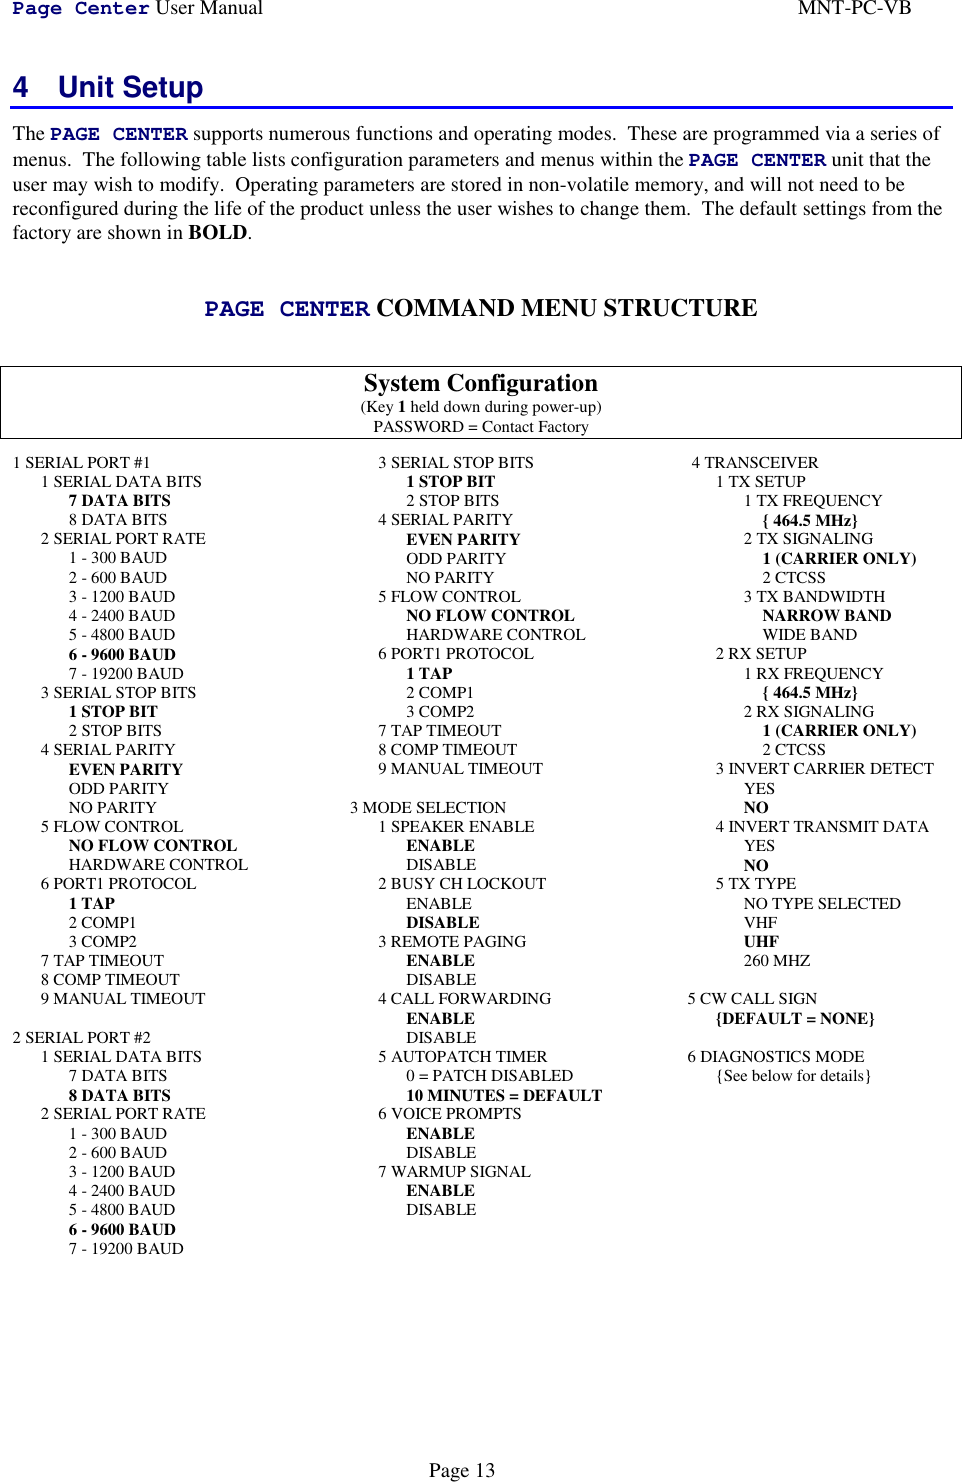 Page Center User Manual MNT-PC-VBPage 134 Unit SetupThe PAGE CENTER supports numerous functions and operating modes.  These are programmed via a series ofmenus.  The following table lists configuration parameters and menus within the PAGE CENTER unit that theuser may wish to modify.  Operating parameters are stored in non-volatile memory, and will not need to bereconfigured during the life of the product unless the user wishes to change them.  The default settings from thefactory are shown in BOLD.PAGE CENTER COMMAND MENU STRUCTURESystem Configuration(Key 1 held down during power-up)PASSWORD = Contact Factory1 SERIAL PORT #1    1 SERIAL DATA BITS7 DATA BITS    8 DATA BITS     2 SERIAL PORT RATE         1 - 300 BAUD         2 - 600 BAUD         3 - 1200 BAUD         4 - 2400 BAUD         5 - 4800 BAUD         6 - 9600 BAUD         7 - 19200 BAUD3 SERIAL STOP BITS1 STOP BIT             2 STOP BITS     4 SERIAL PARITYEVEN PARITY             ODD PARITY             NO PARITY5 FLOW CONTROLNO FLOW CONTROLHARDWARE CONTROL6 PORT1 PROTOCOL         1 TAP         2 COMP1         3 COMP27 TAP TIMEOUT8 COMP TIMEOUT9 MANUAL TIMEOUT2 SERIAL PORT #2    1 SERIAL DATA BITS7 DATA BITS    8 DATA BITS2 SERIAL PORT RATE         1 - 300 BAUD         2 - 600 BAUD         3 - 1200 BAUD         4 - 2400 BAUD         5 - 4800 BAUD         6 - 9600 BAUD         7 - 19200 BAUD     3 SERIAL STOP BITS1 STOP BIT             2 STOP BITS     4 SERIAL PARITYEVEN PARITY             ODD PARITY             NO PARITY5 FLOW CONTROLNO FLOW CONTROLHARDWARE CONTROL6 PORT1 PROTOCOL         1 TAP         2 COMP1         3 COMP27 TAP TIMEOUT8 COMP TIMEOUT9 MANUAL TIMEOUT3 MODE SELECTION1 SPEAKER ENABLEENABLEDISABLE2 BUSY CH LOCKOUTENABLEDISABLE3 REMOTE PAGINGENABLEDISABLE4 CALL FORWARDINGENABLEDISABLE5 AUTOPATCH TIMER0 = PATCH DISABLED10 MINUTES = DEFAULT6 VOICE PROMPTSENABLEDISABLE7 WARMUP SIGNALENABLEDISABLE 4 TRANSCEIVER1 TX SETUP         1 TX FREQUENCY{ 464.5 MHz}2 TX SIGNALING             1 (CARRIER ONLY)             2 CTCSS         3 TX BANDWIDTHNARROW BAND                 WIDE BAND2 RX SETUP 1 RX FREQUENCY{ 464.5 MHz}2 RX SIGNALING1 (CARRIER ONLY)2 CTCSS3 INVERT CARRIER DETECTYESNO4 INVERT TRANSMIT DATAYESNO5 TX TYPENO TYPE SELECTEDVHF        UHF260 MHZ5 CW CALL SIGN{DEFAULT = NONE}6 DIAGNOSTICS MODE{See below for details}